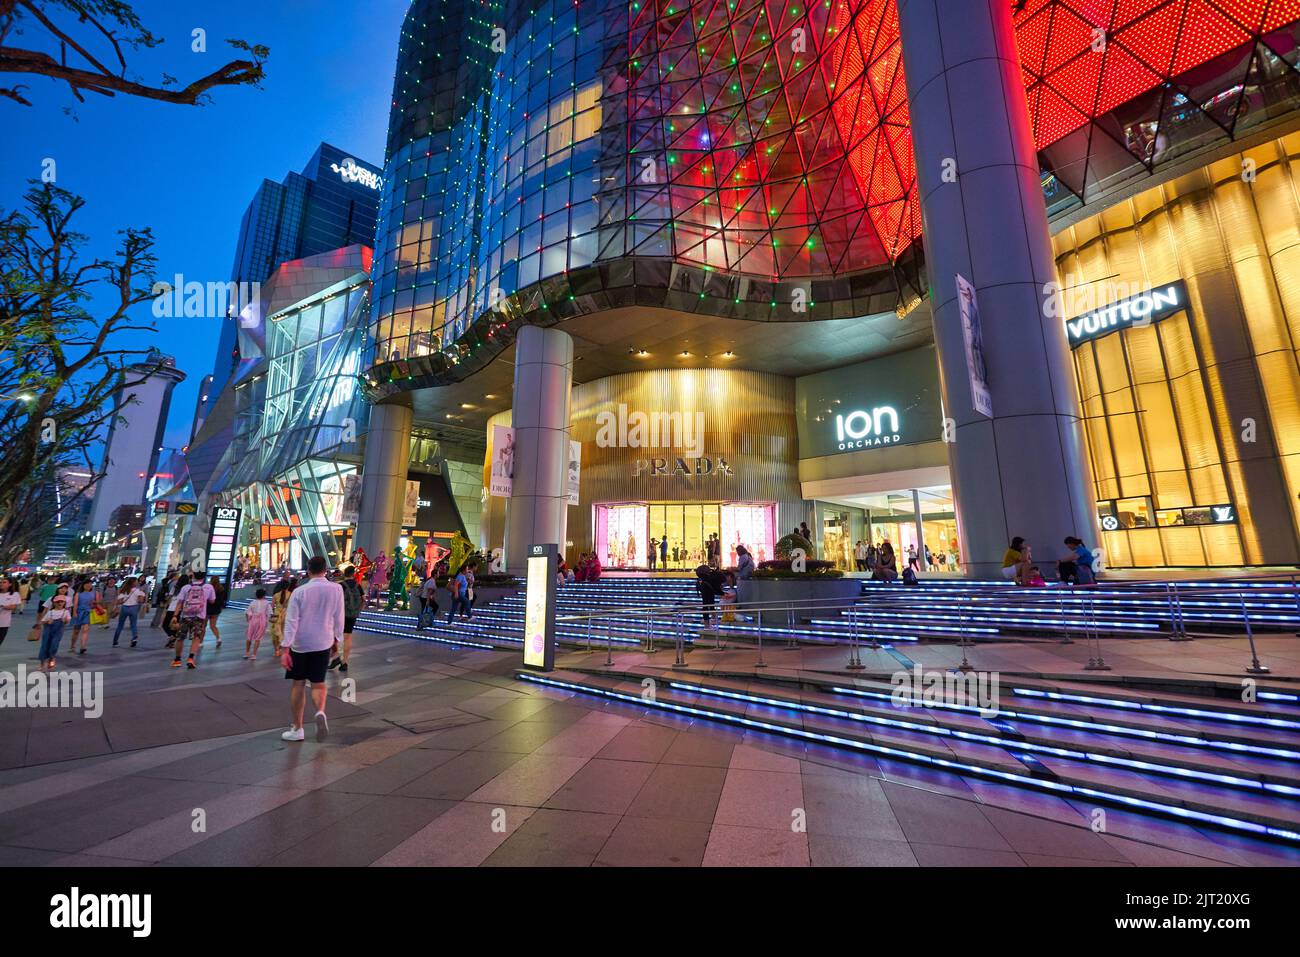 SINGAPORE - CIRCA JANUARY, 2020: street level view of ION Orchard shopping mall in Singapore in the evening. Stock Photo